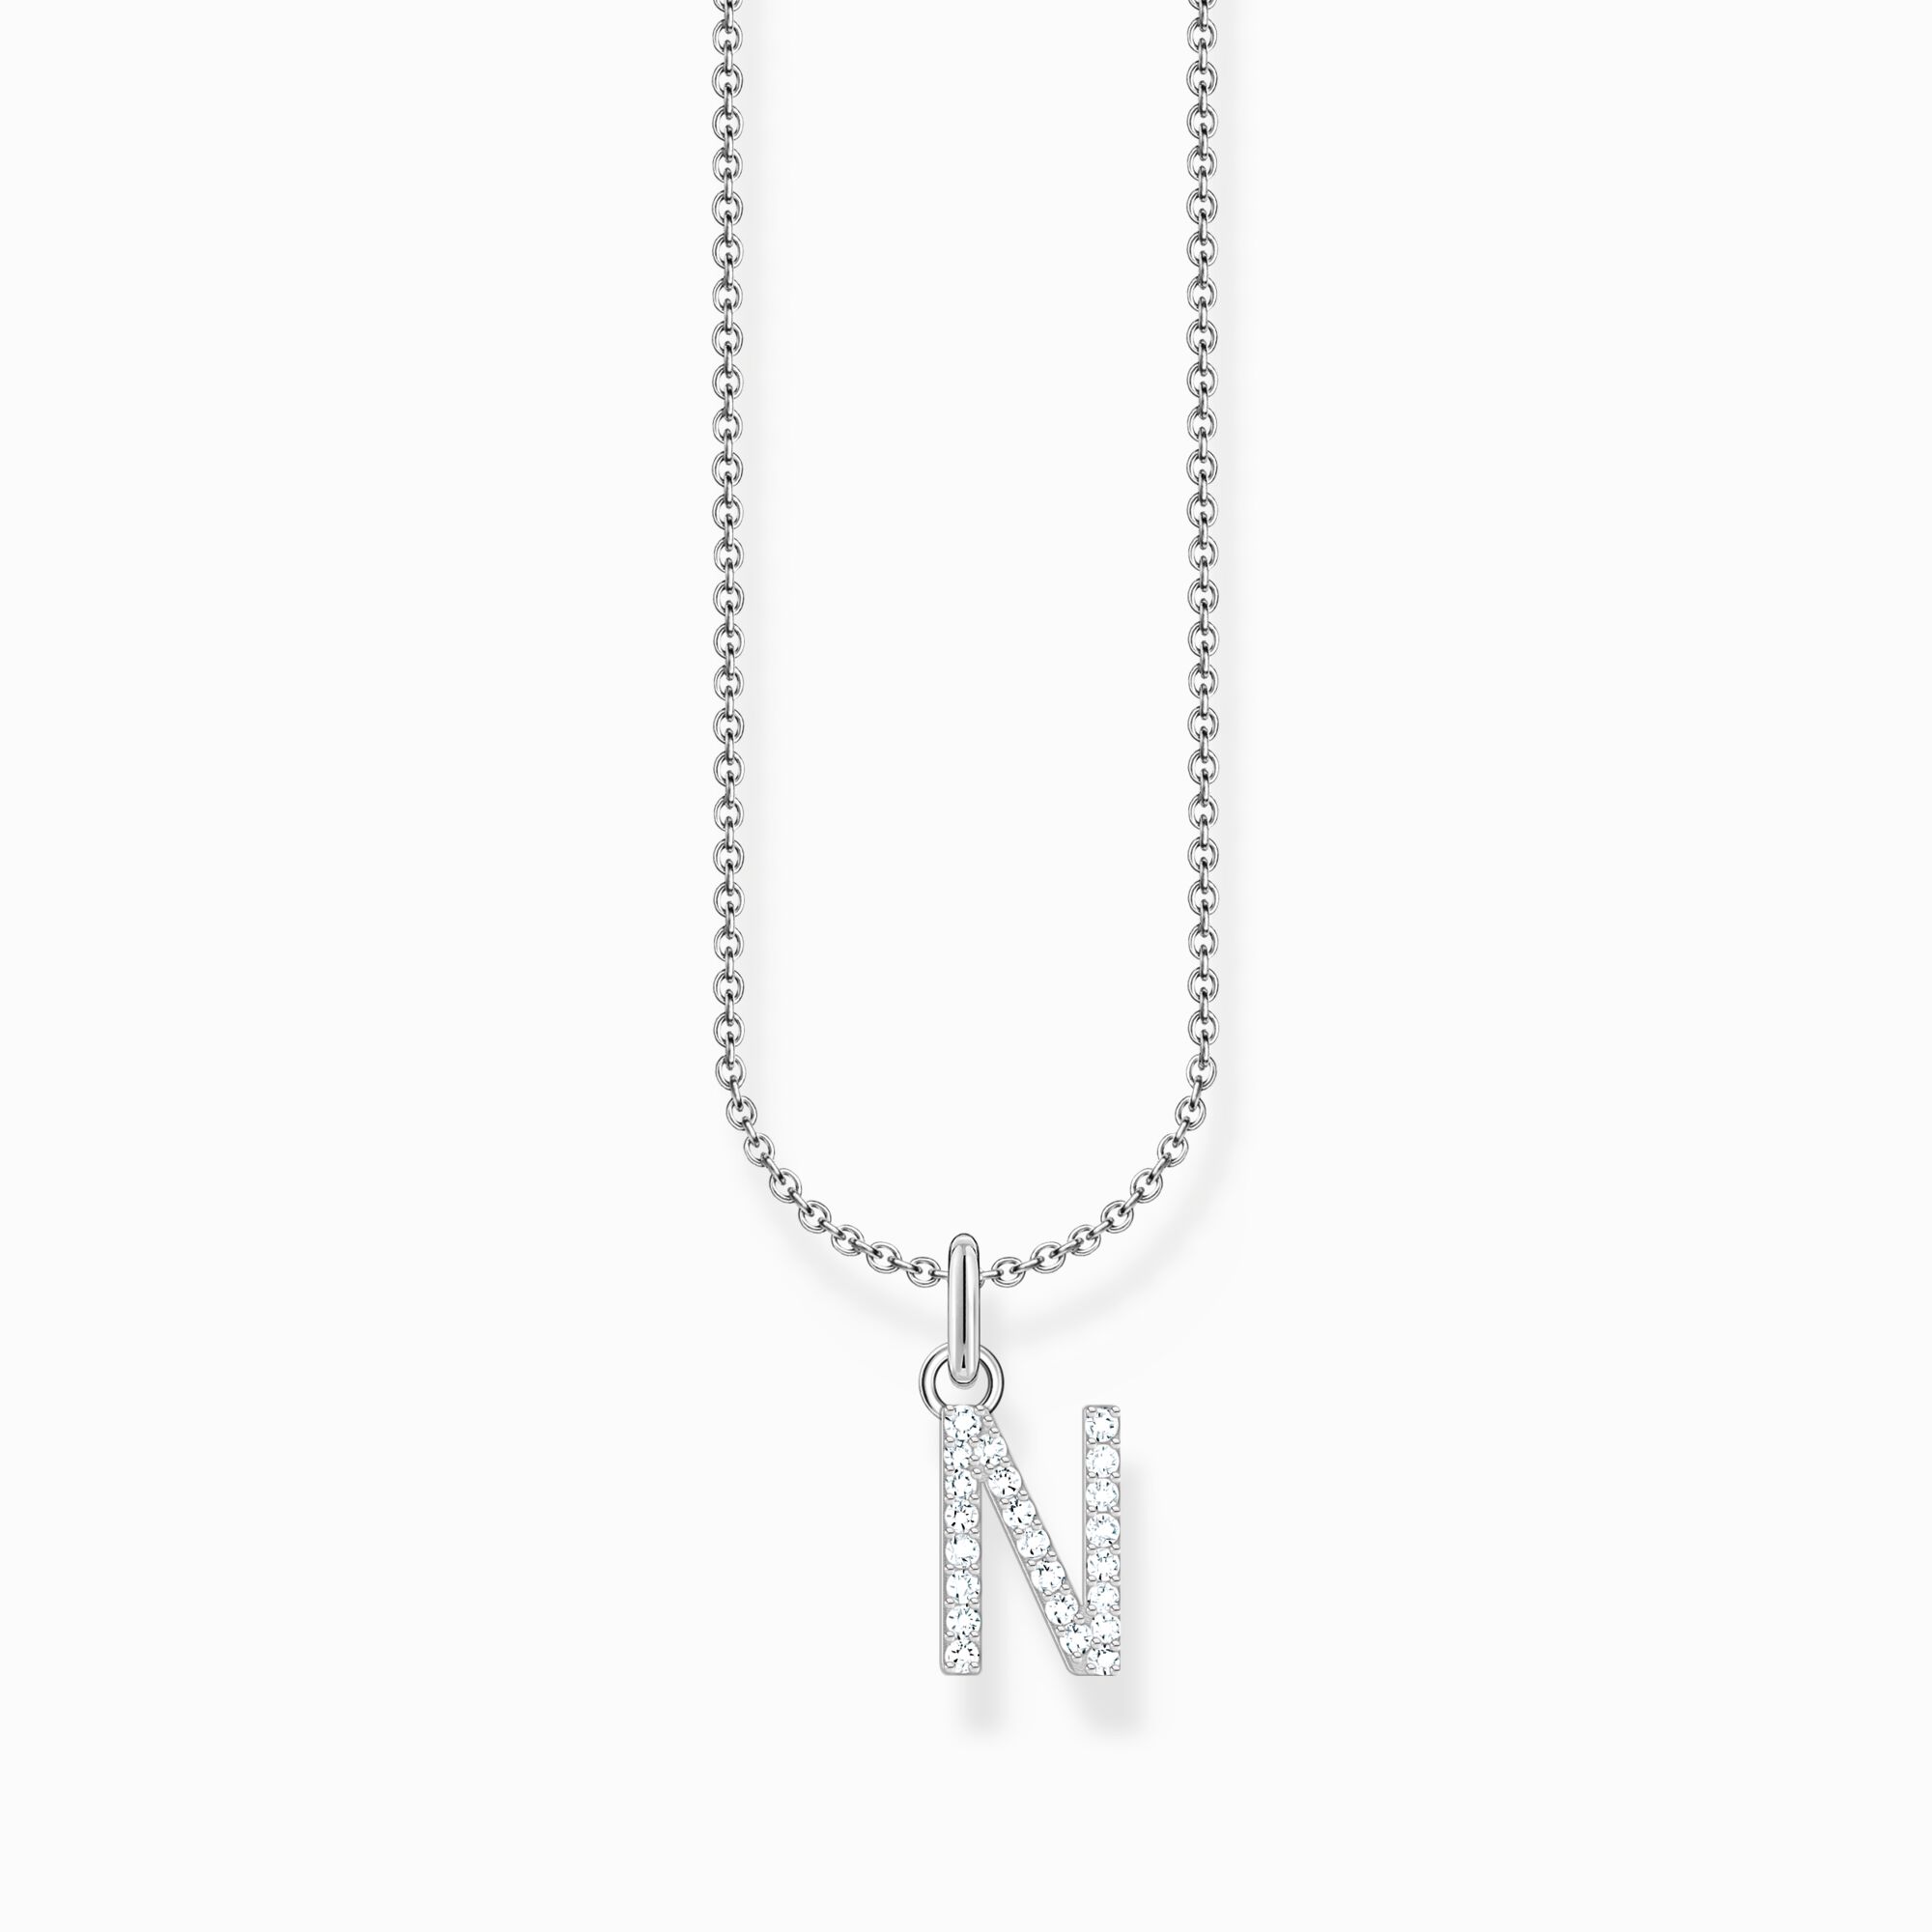 Silver necklace with letter pendant N and white zirconia from the Charming Collection collection in the THOMAS SABO online store